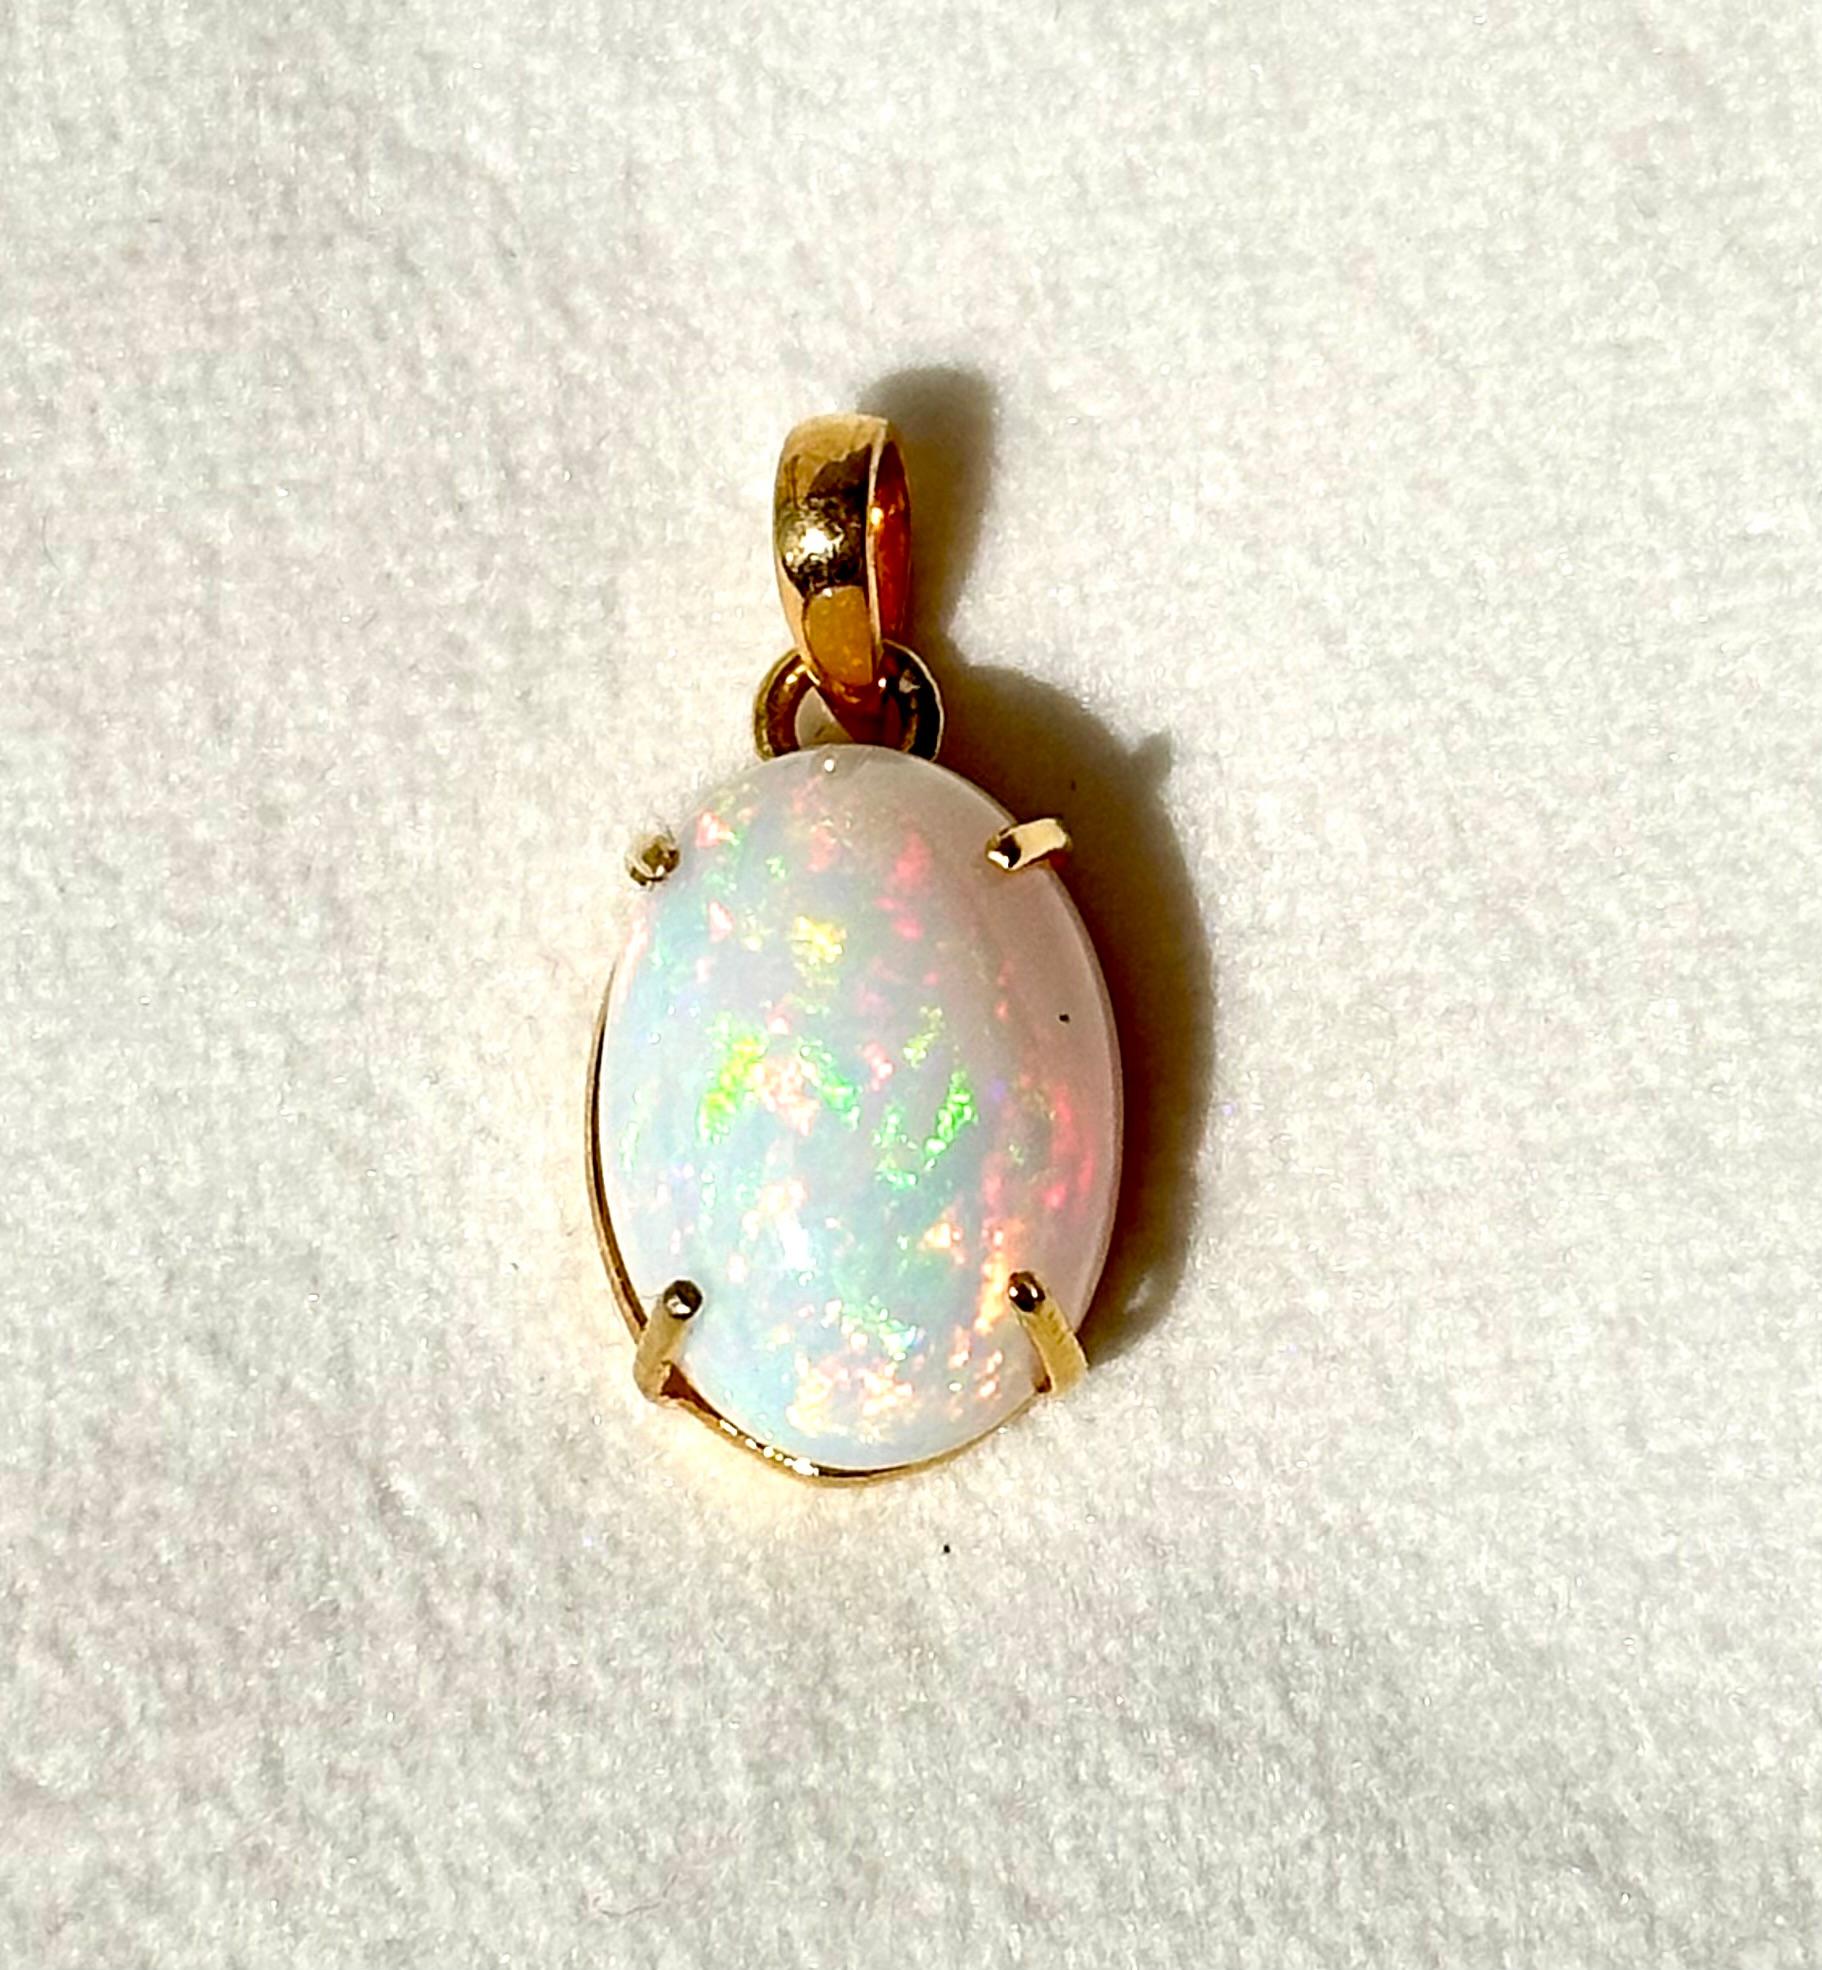 This is a beautiful opal stone set in 14K gold. It consists of:
Gross weight- 4.270g

Gemstone- Natural opal
Gemstone weight- 12.62ct
Gemstone origin- Ethiopia

Metal- Solid Gold
Metal purity- 14K yellow gold

